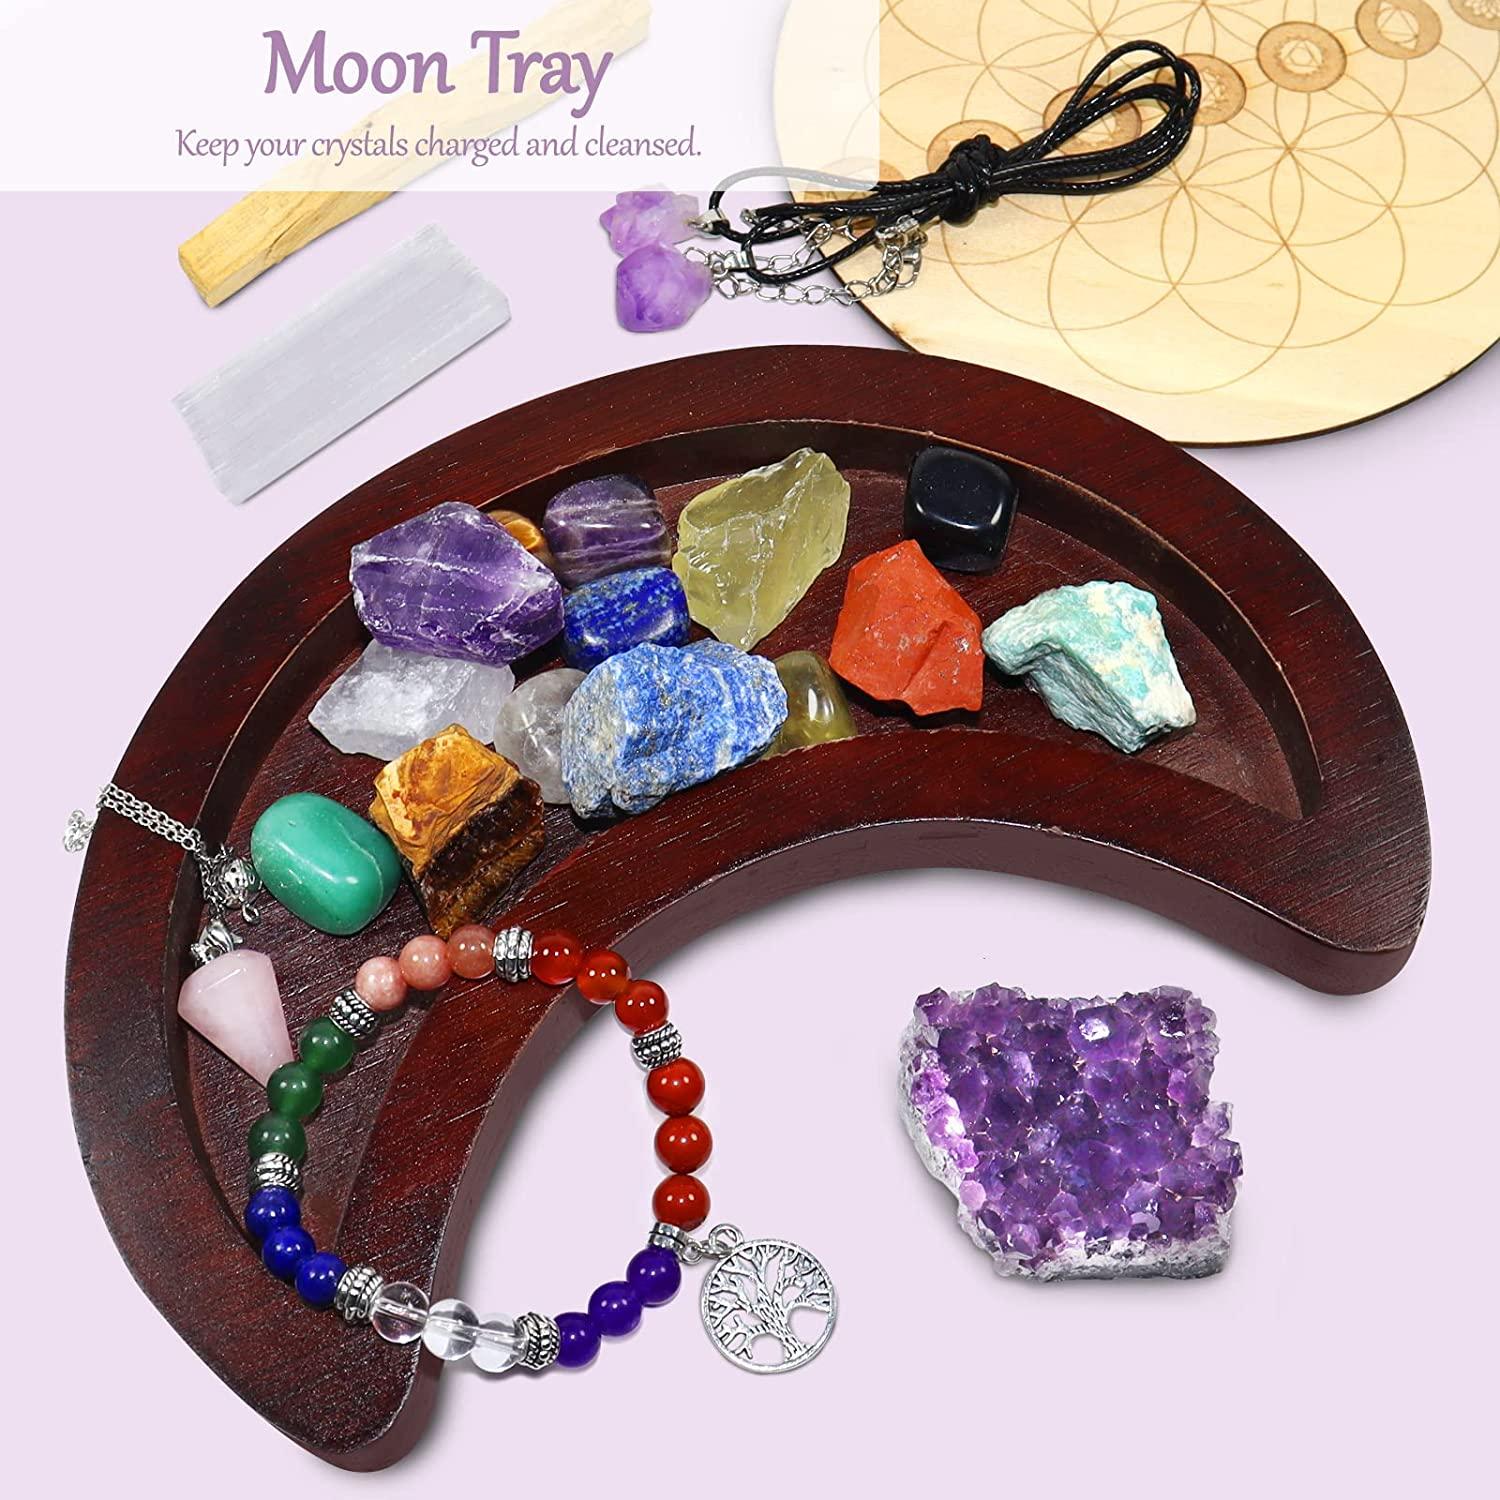 Healing Crystals Set, 23pcs Natural Healing Stones for Yoga Meditation  Reiki, 7 Tumbled and 7 Raw Stones for 7 Chakras Balancing with Amethyst  Cluster, Moon Tray, Pendulum, Necklace, Selenite